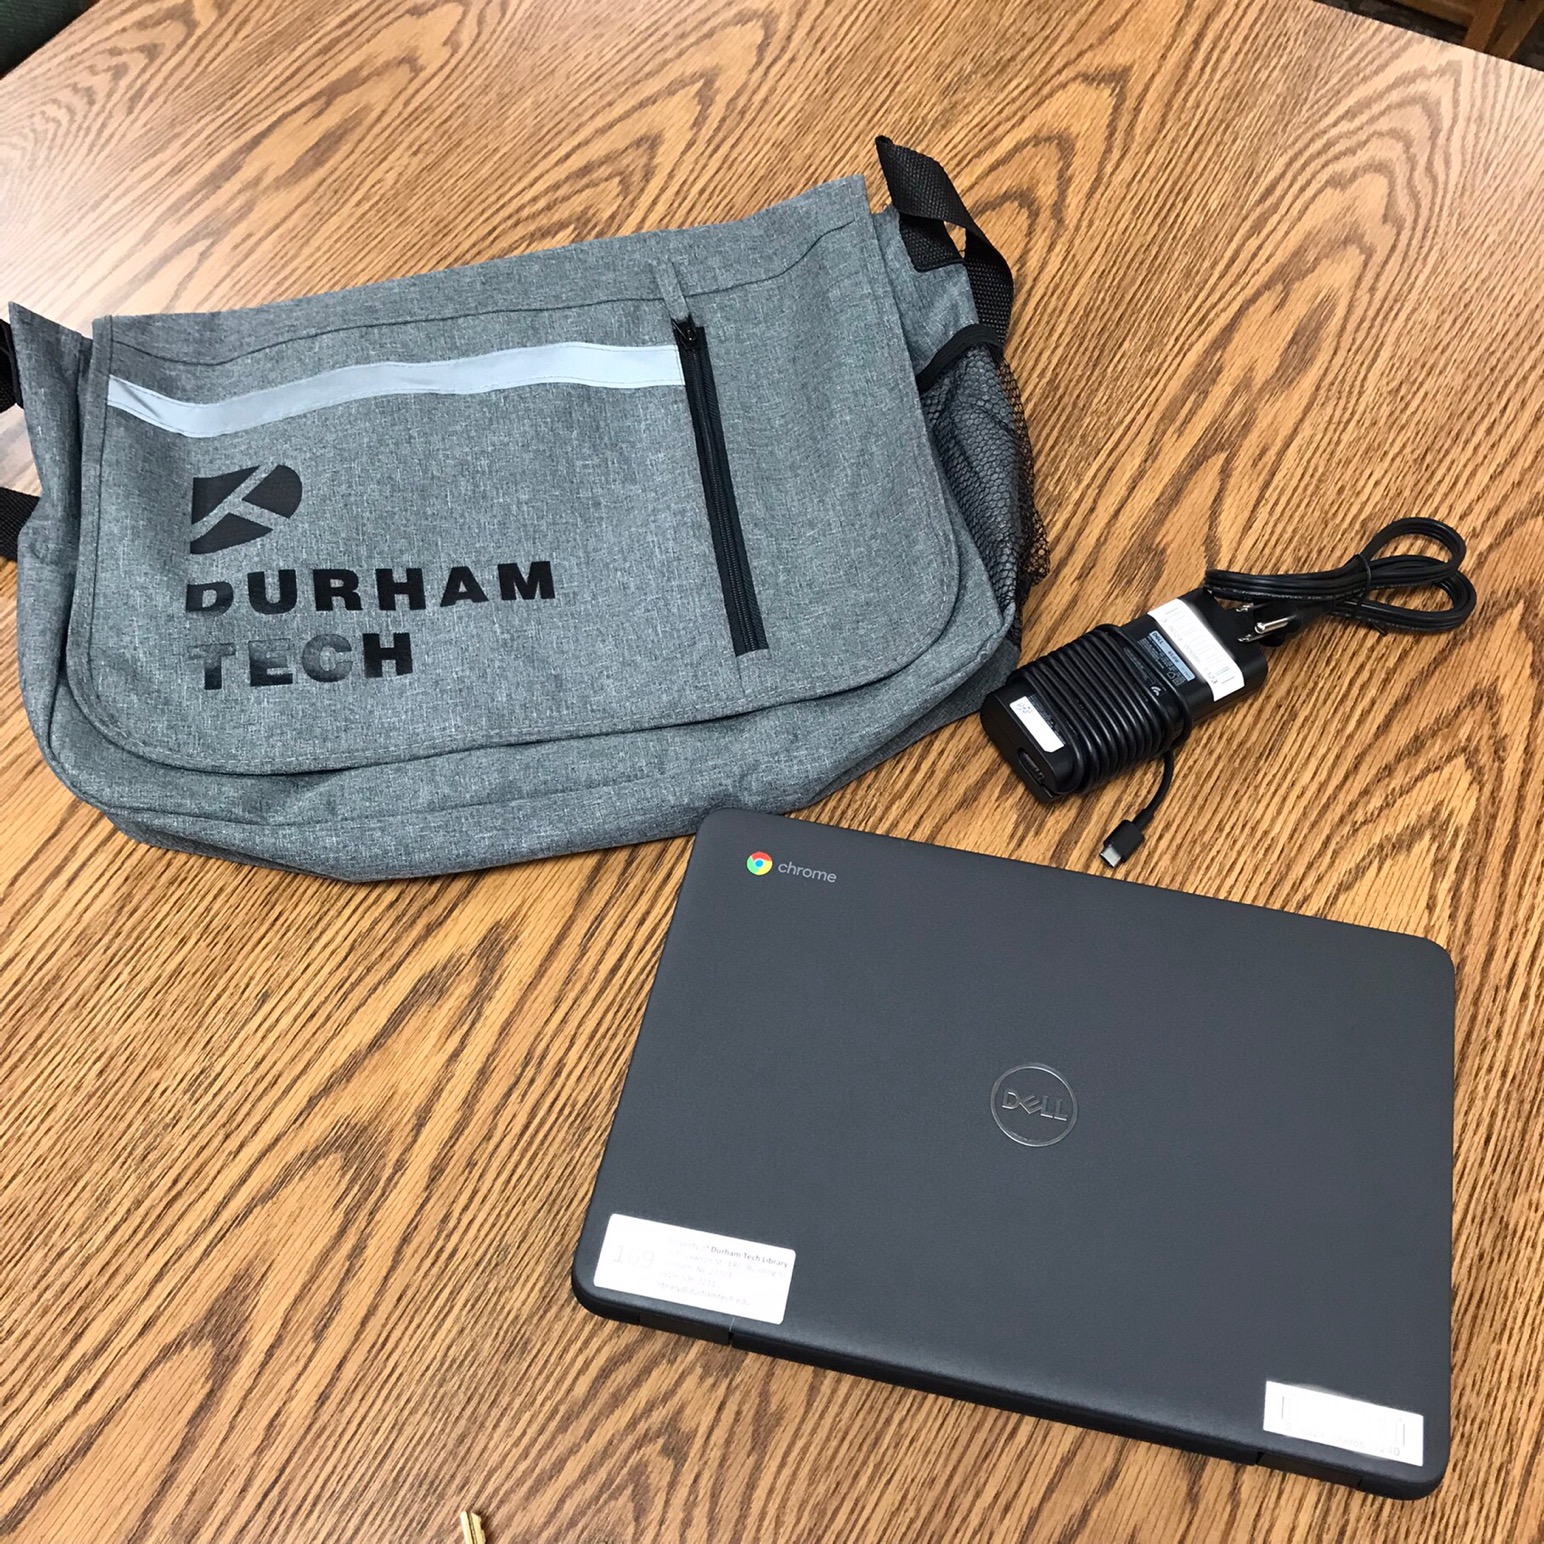 Dell Chromebook, Durham Tech bag, and charger